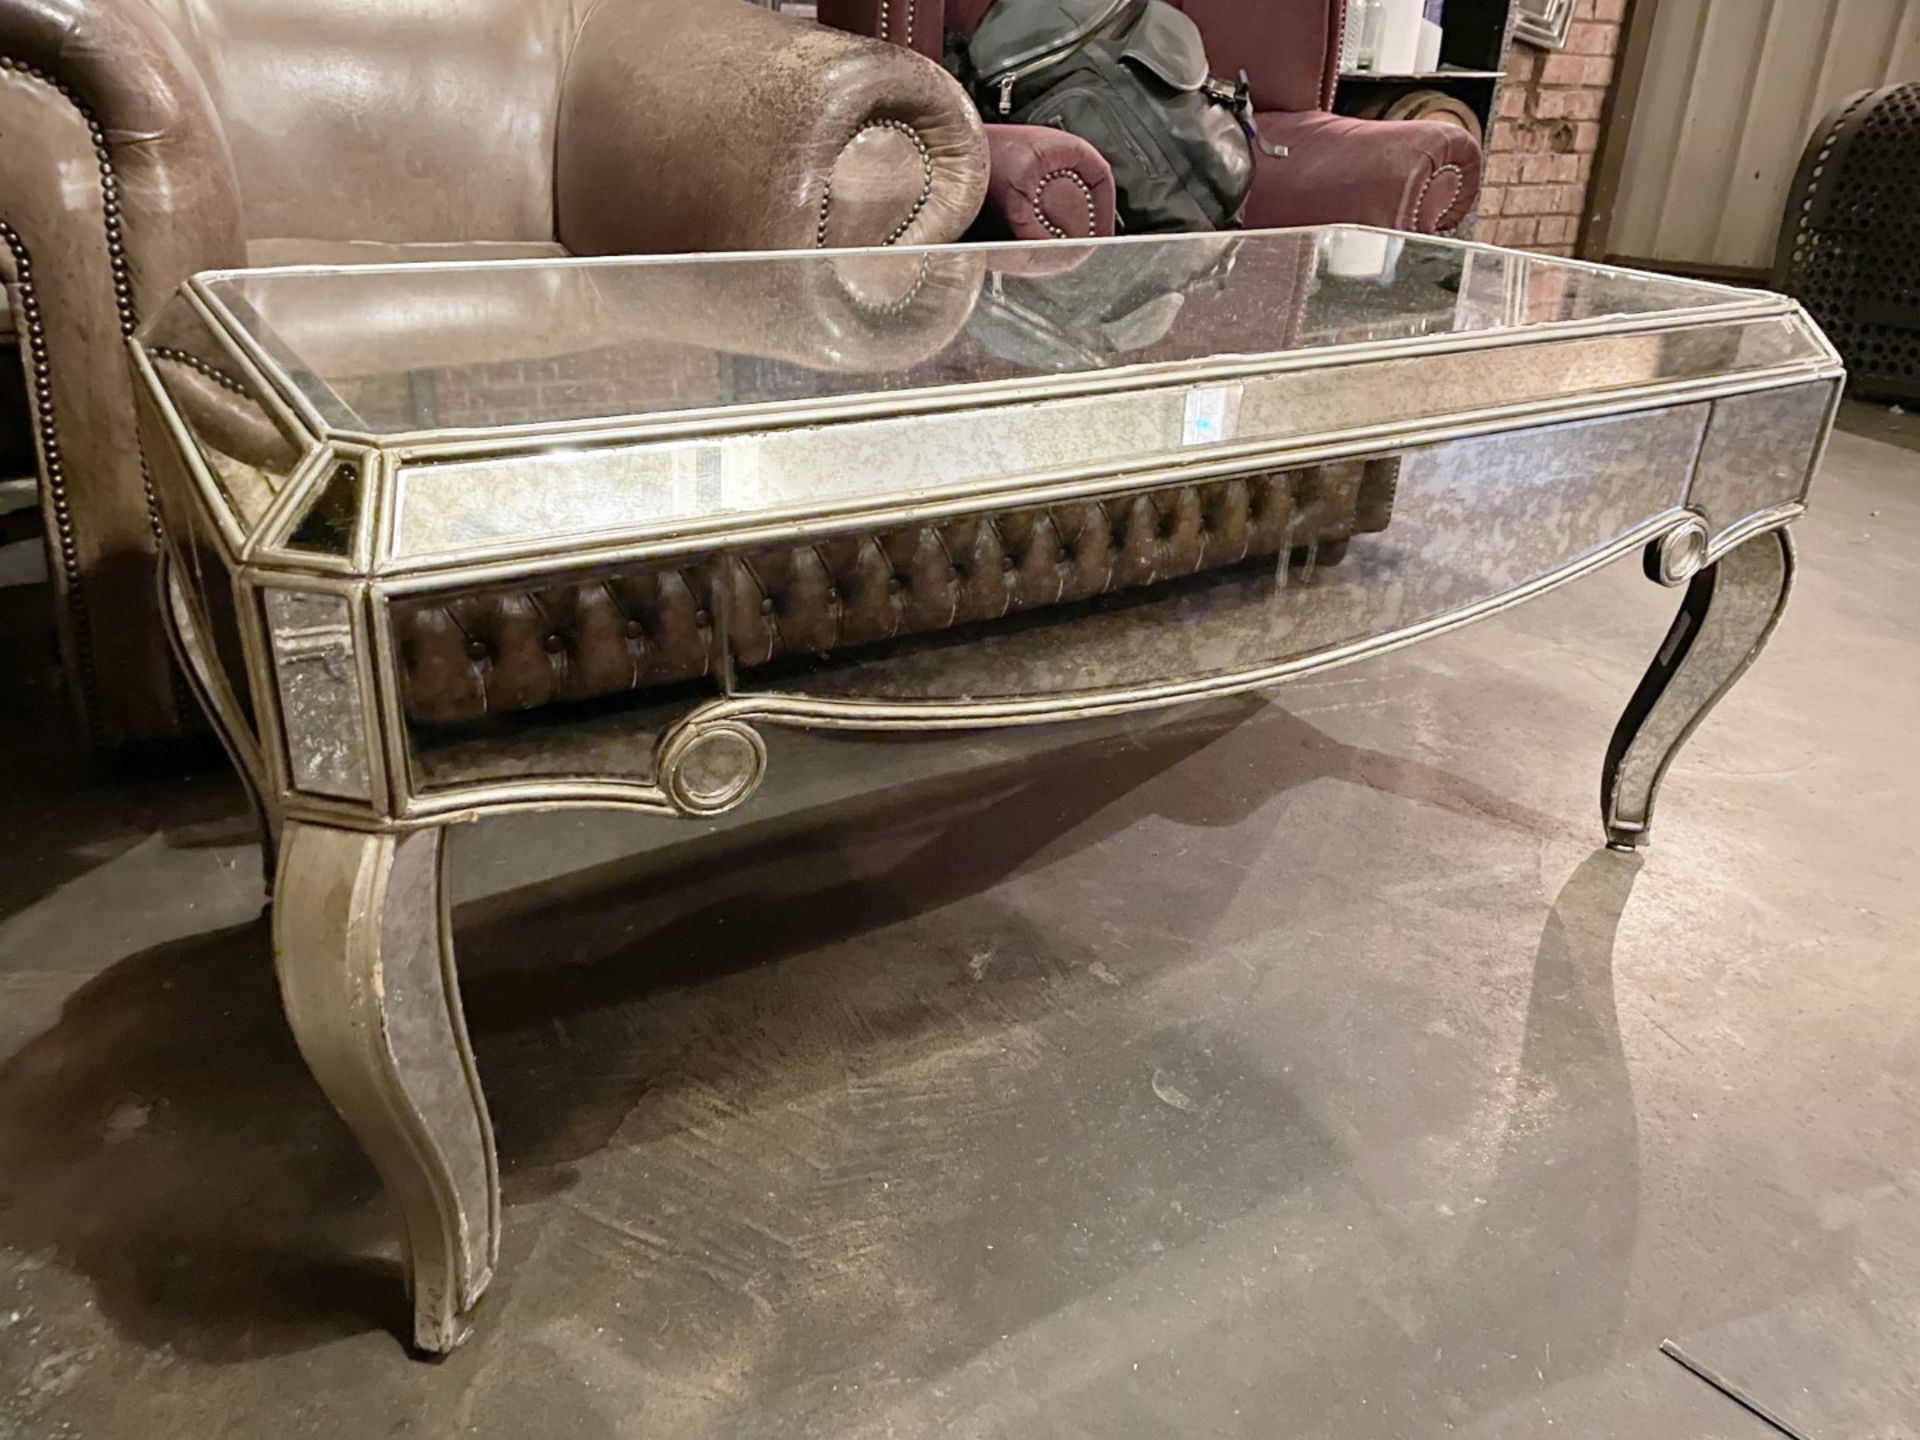 1 x Vintage French-style Mirrored Rectangular Cocktail Coffee Table with an Aged Aesthetic - Image 4 of 10